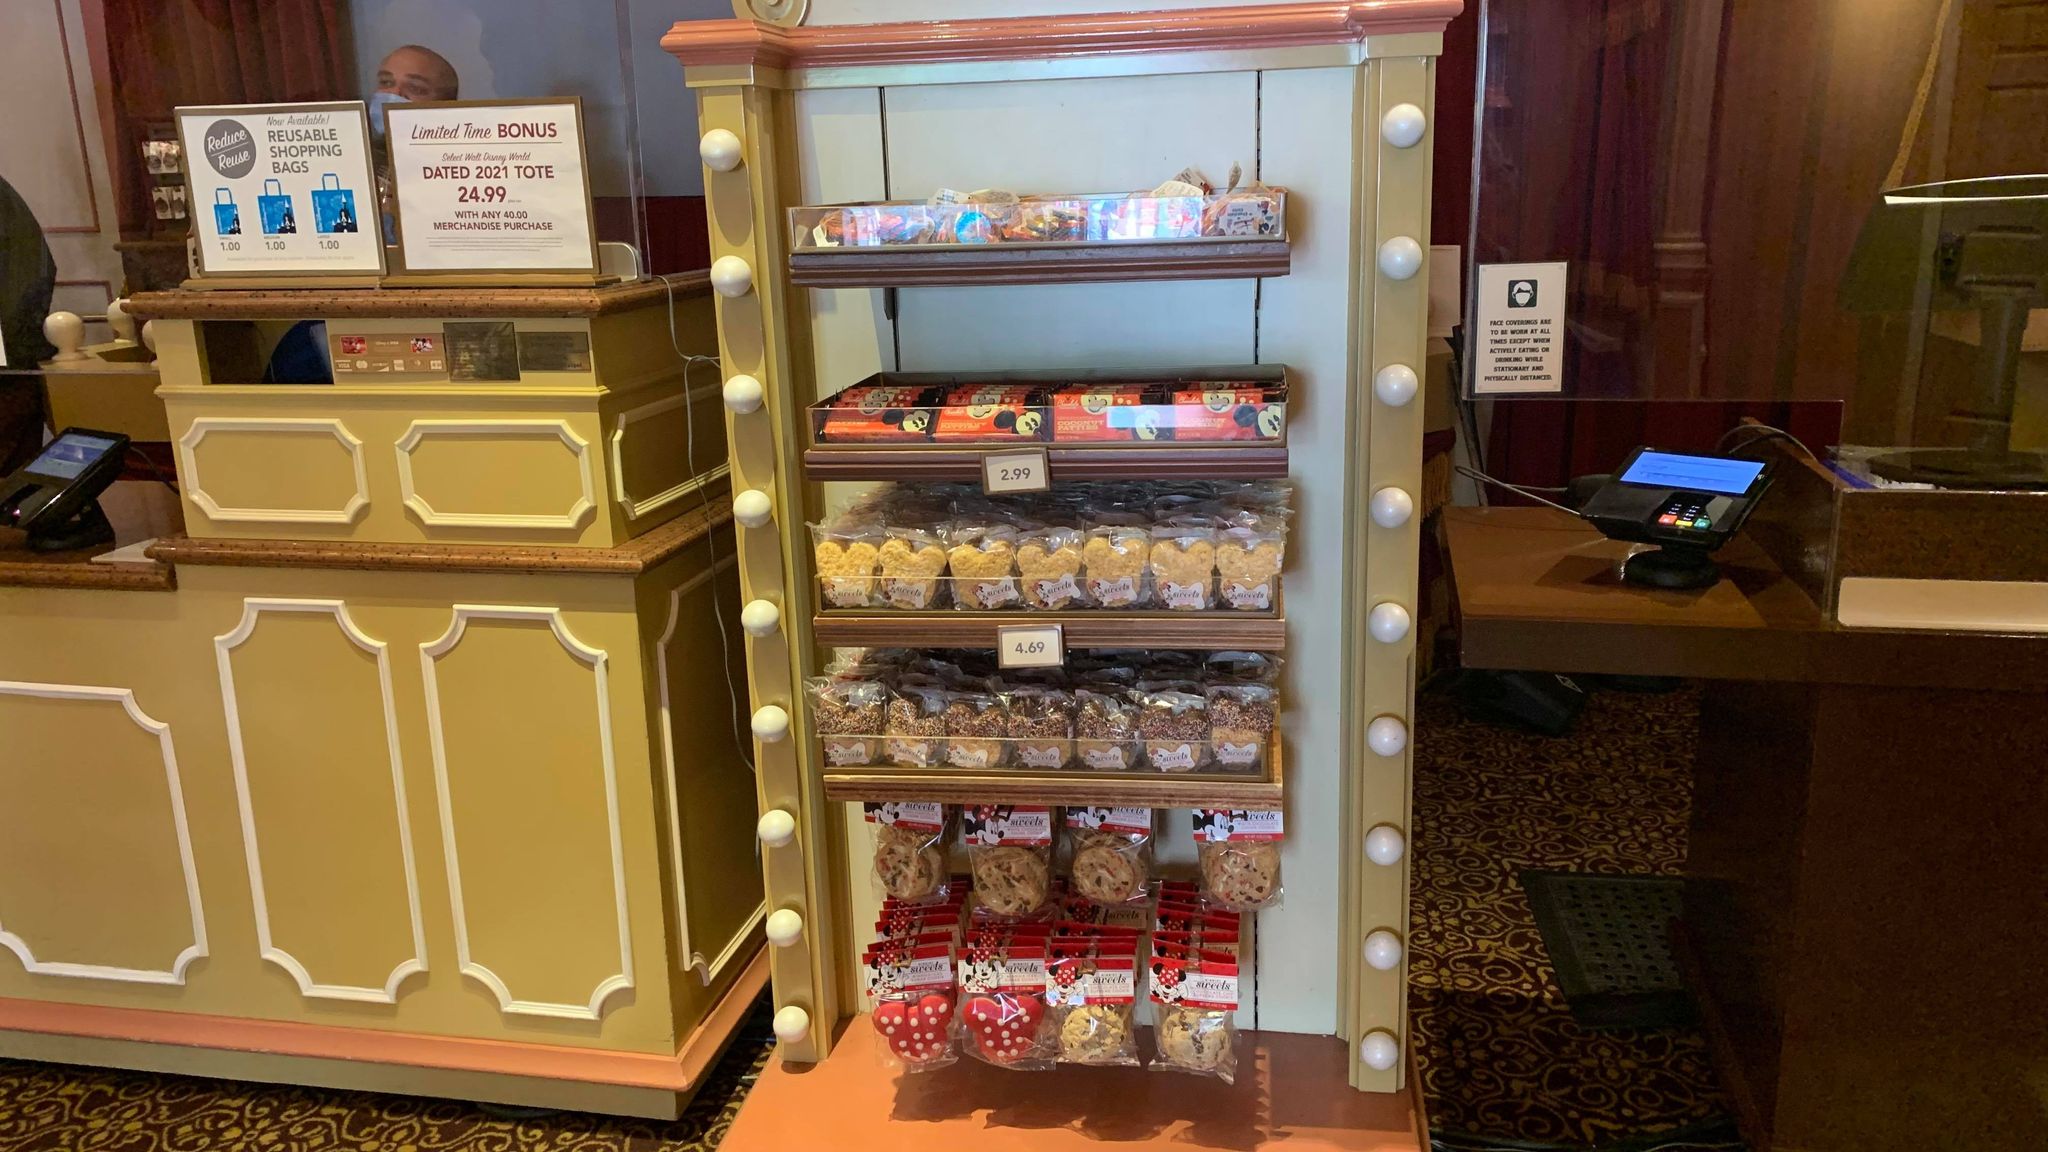 Main Street Confectionery now open in temporary location at the Magic Kingdom